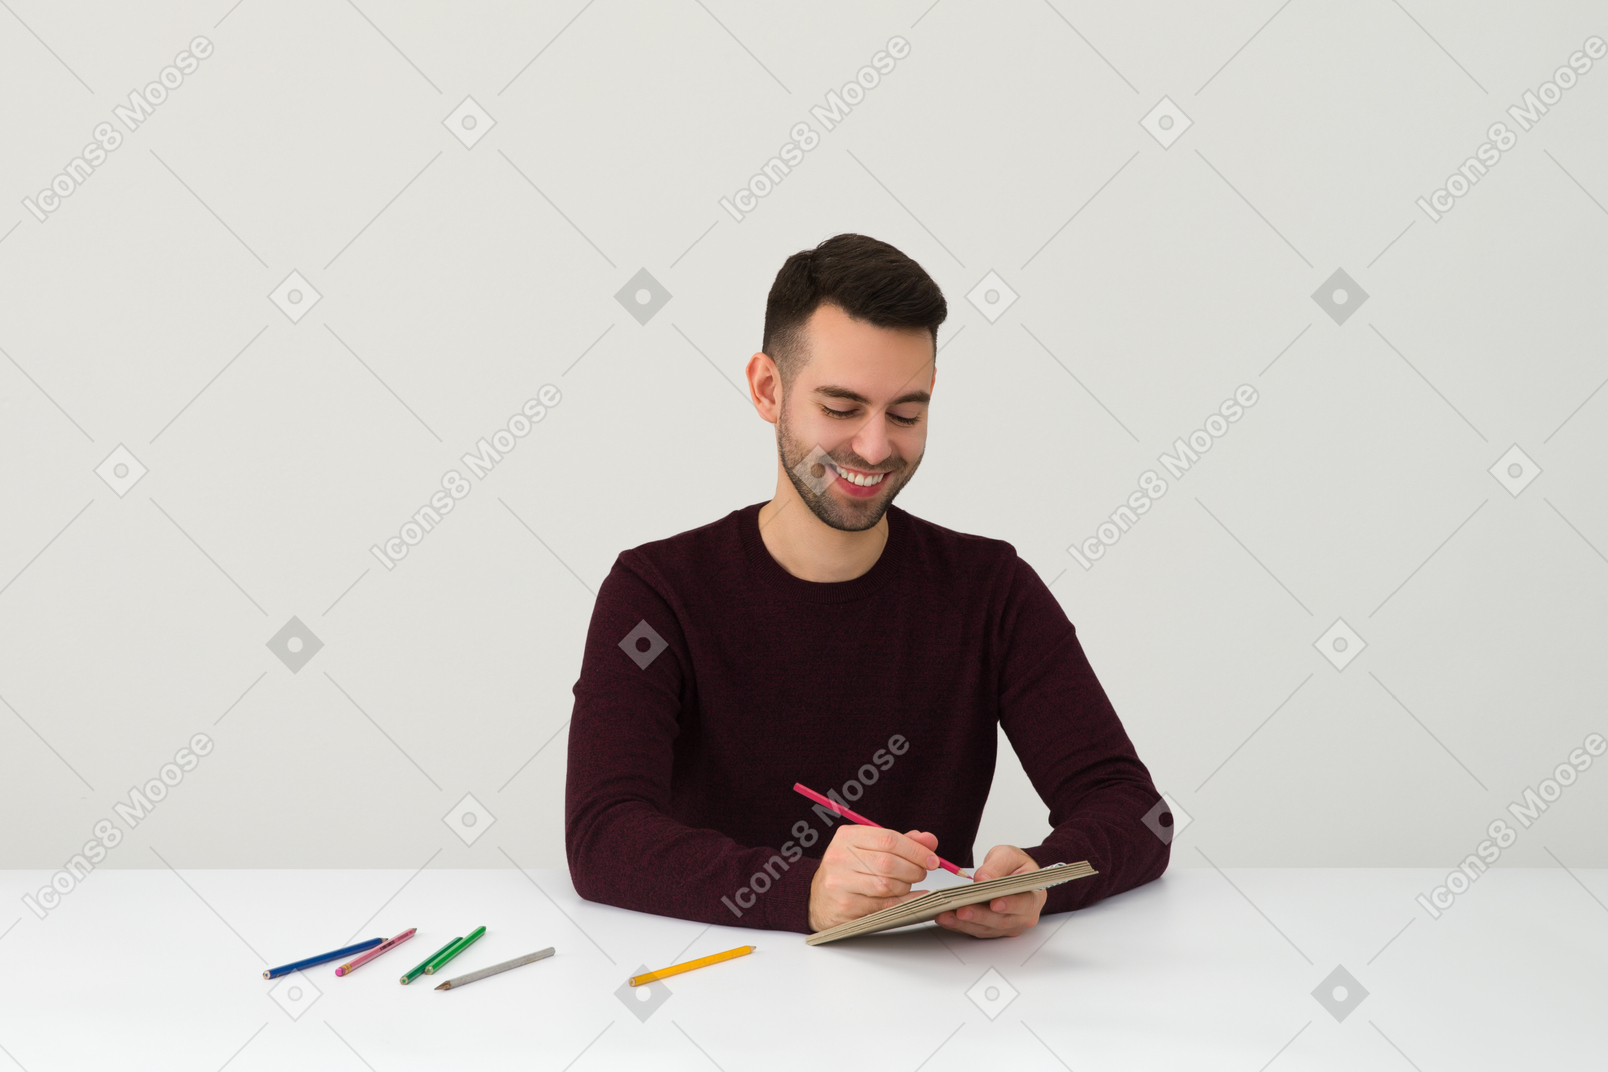 Drawing and smiling